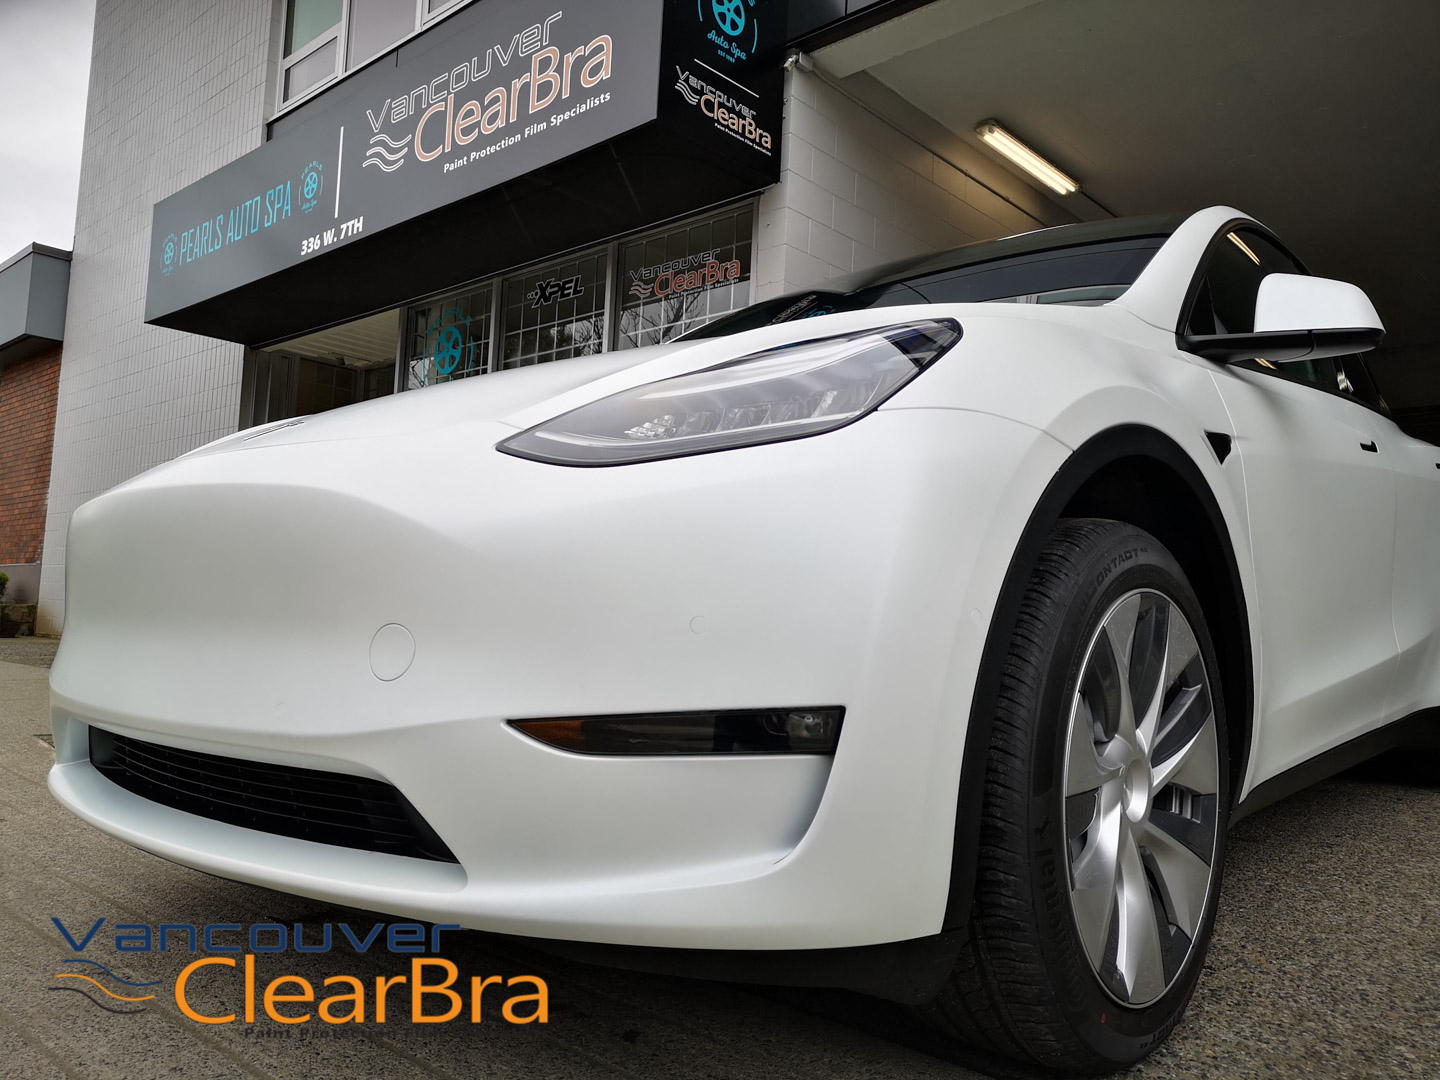 Tesla Model 3 Xpel Ultimate - Vancouver ClearBra, This Tesl…